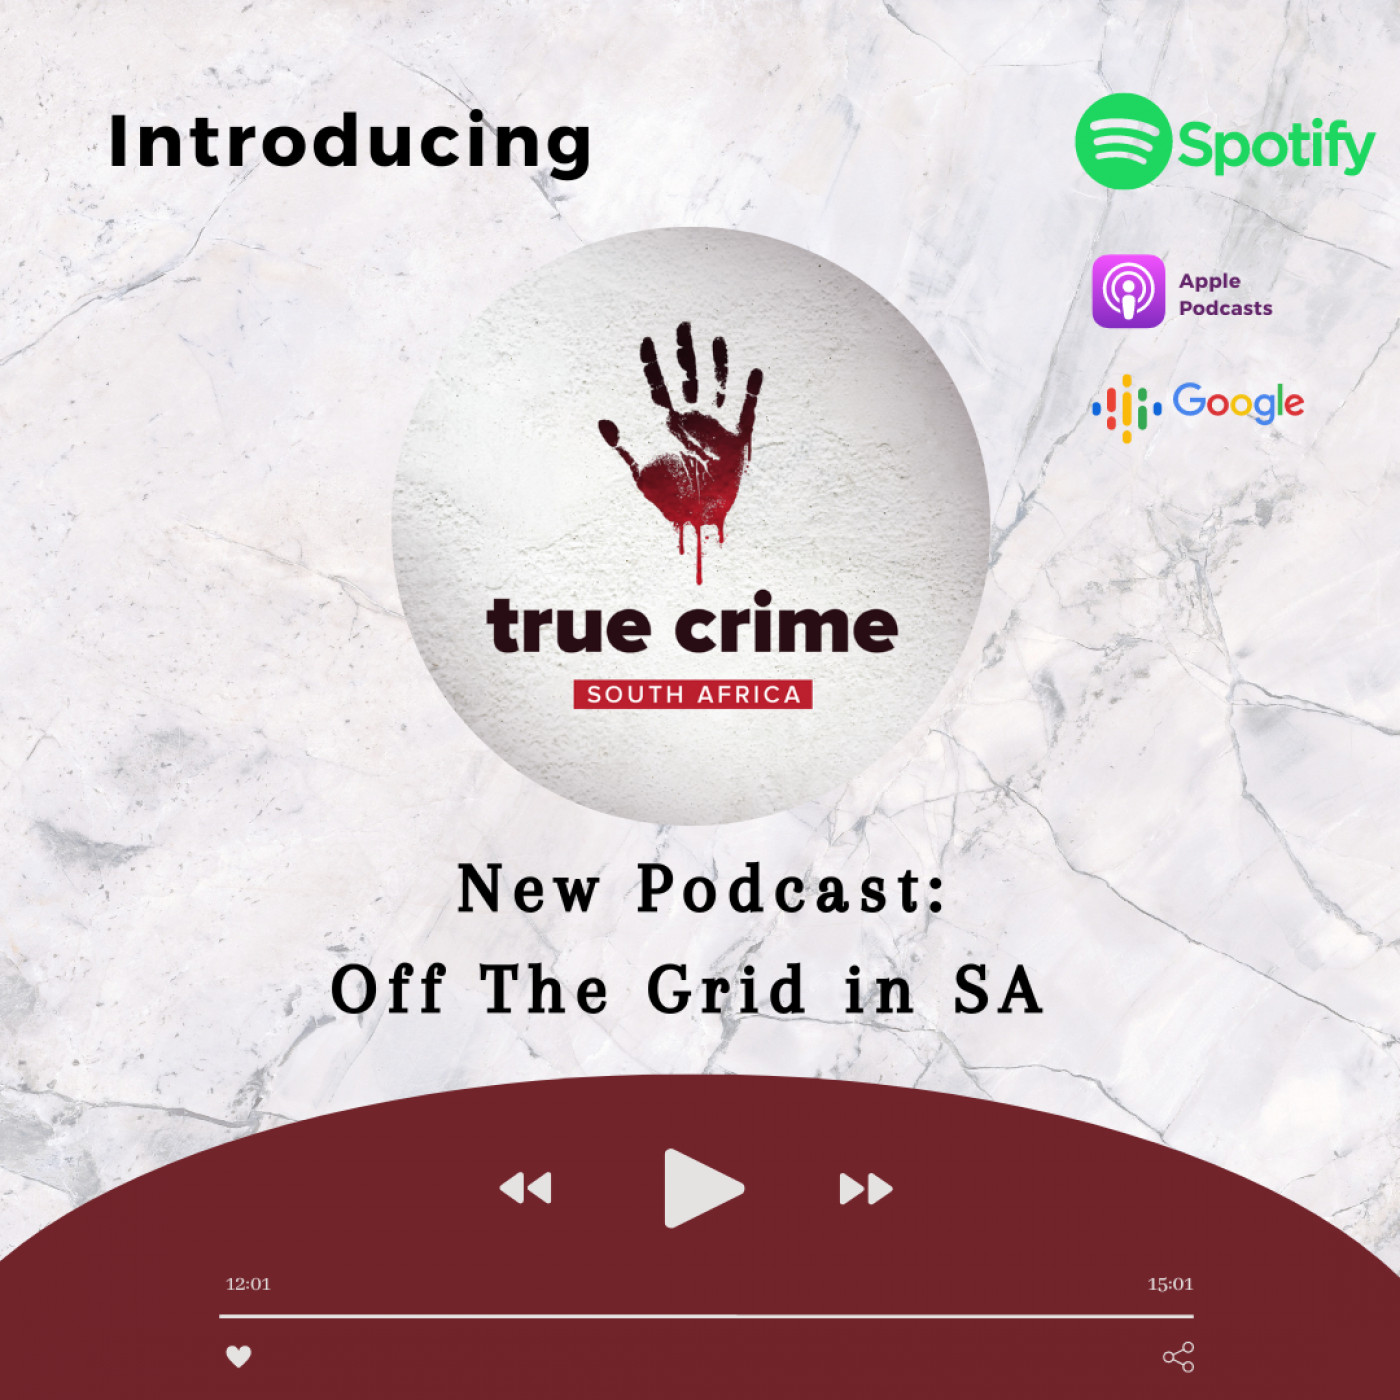 Introducing: Off the Grid in SA